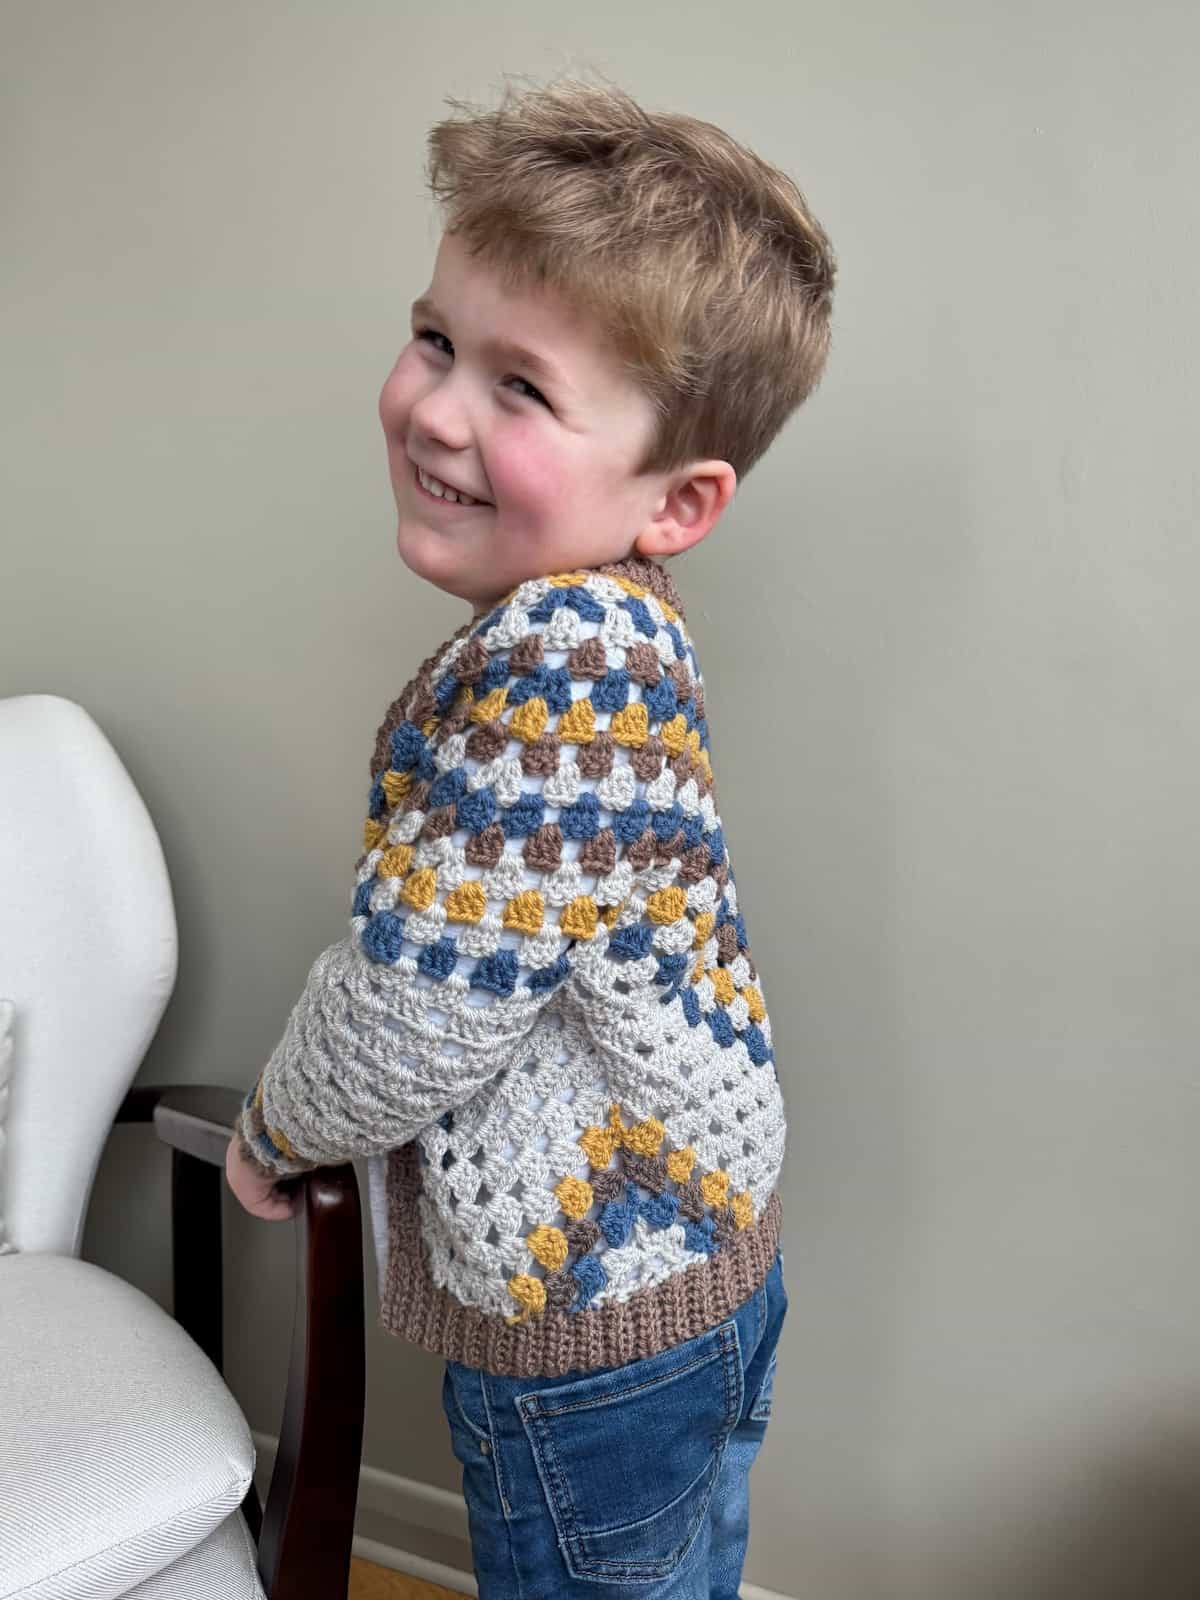 A young boy smiling wearing a crocheted cardigan standing in front of a chair.